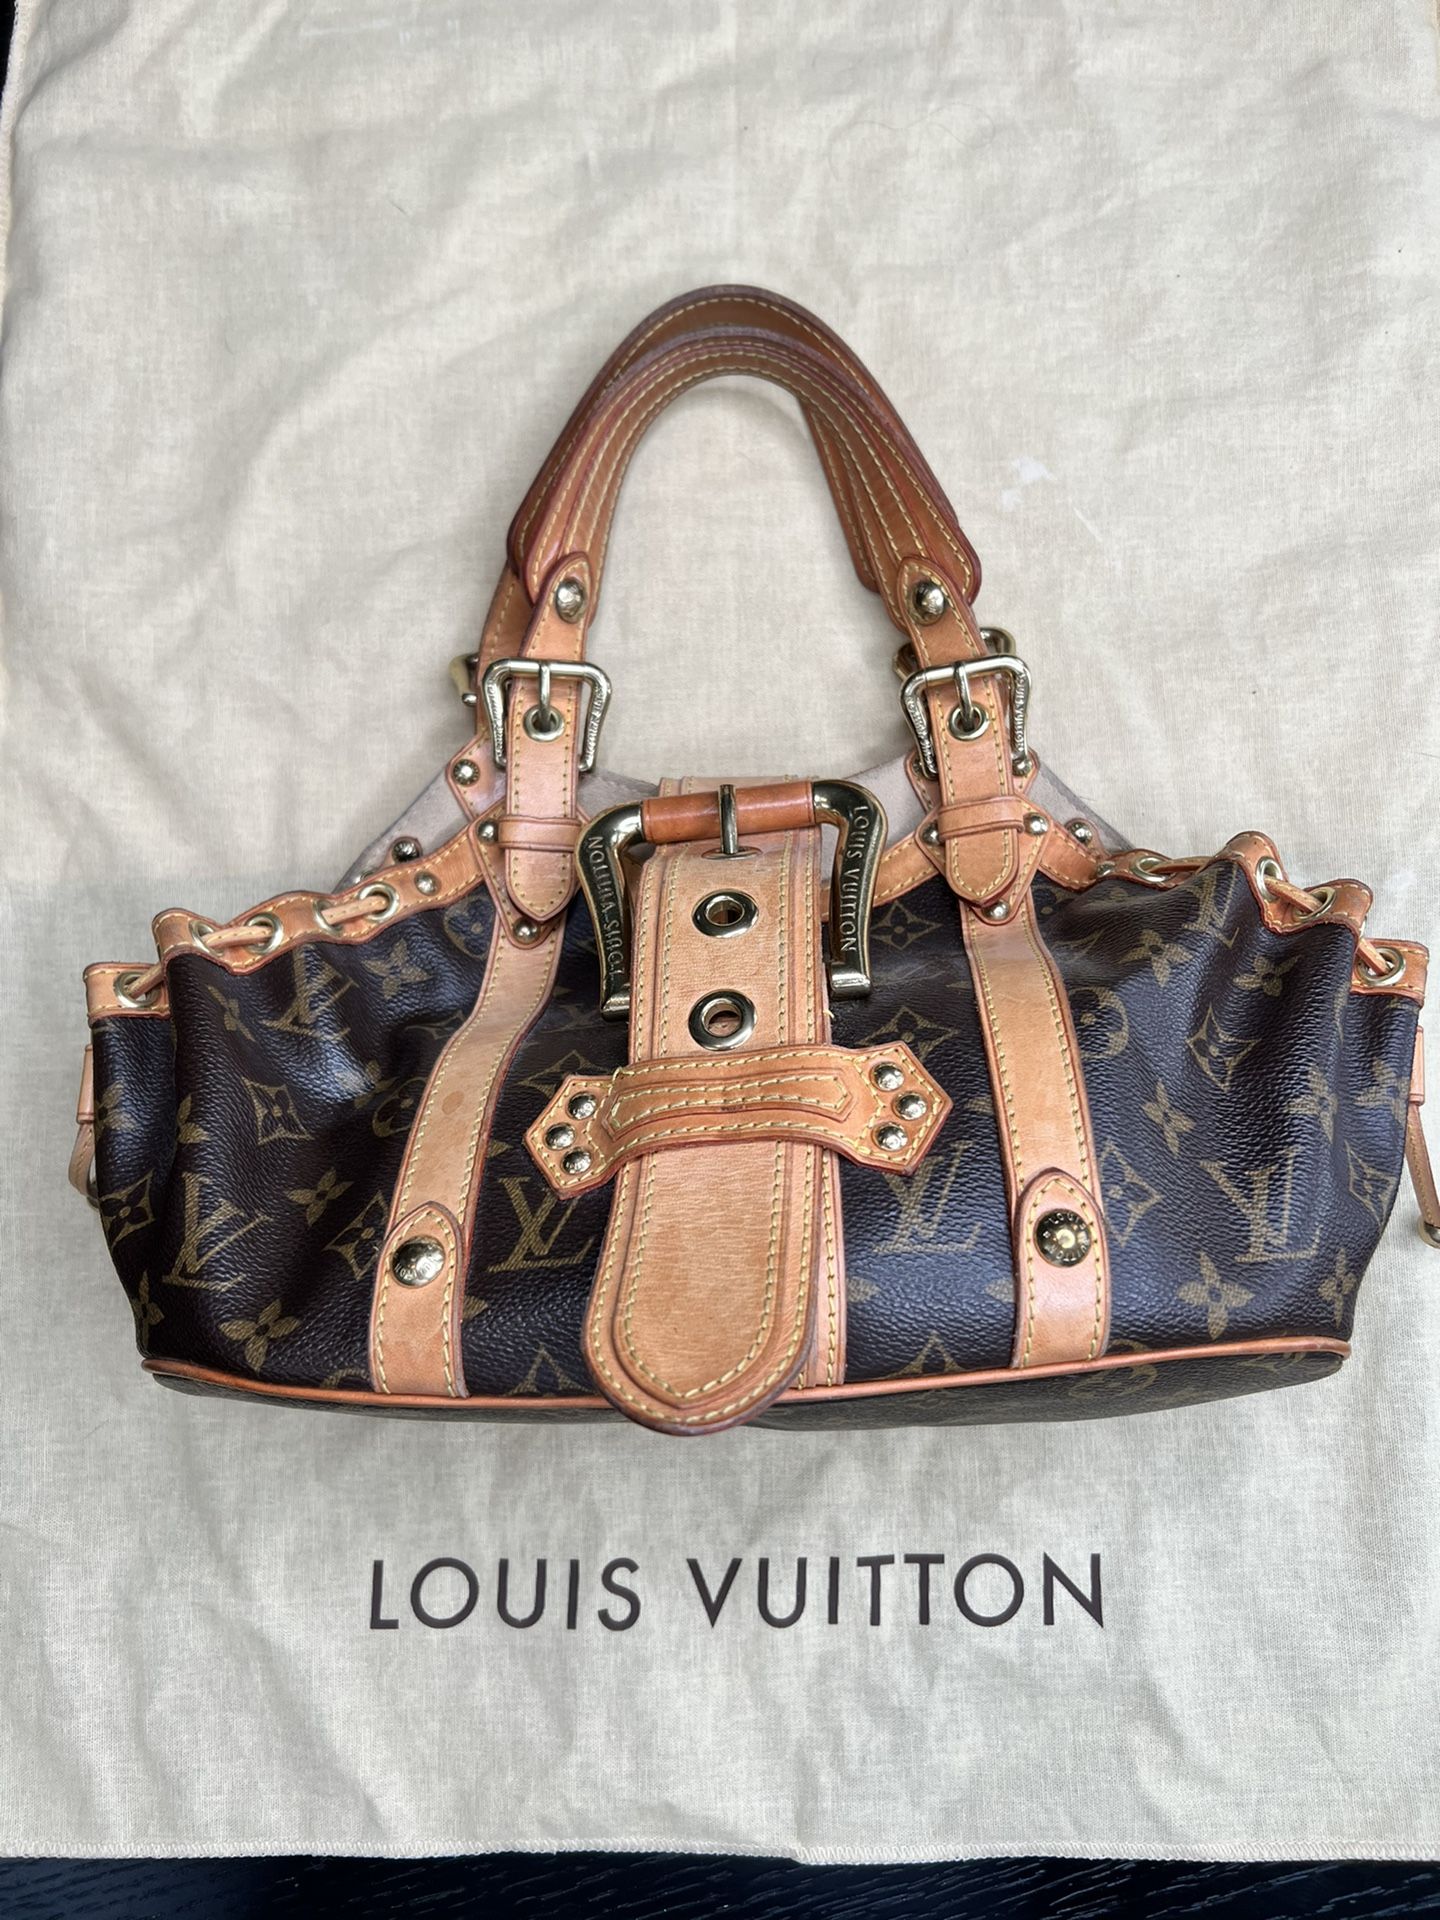 theda gm louis vuitton